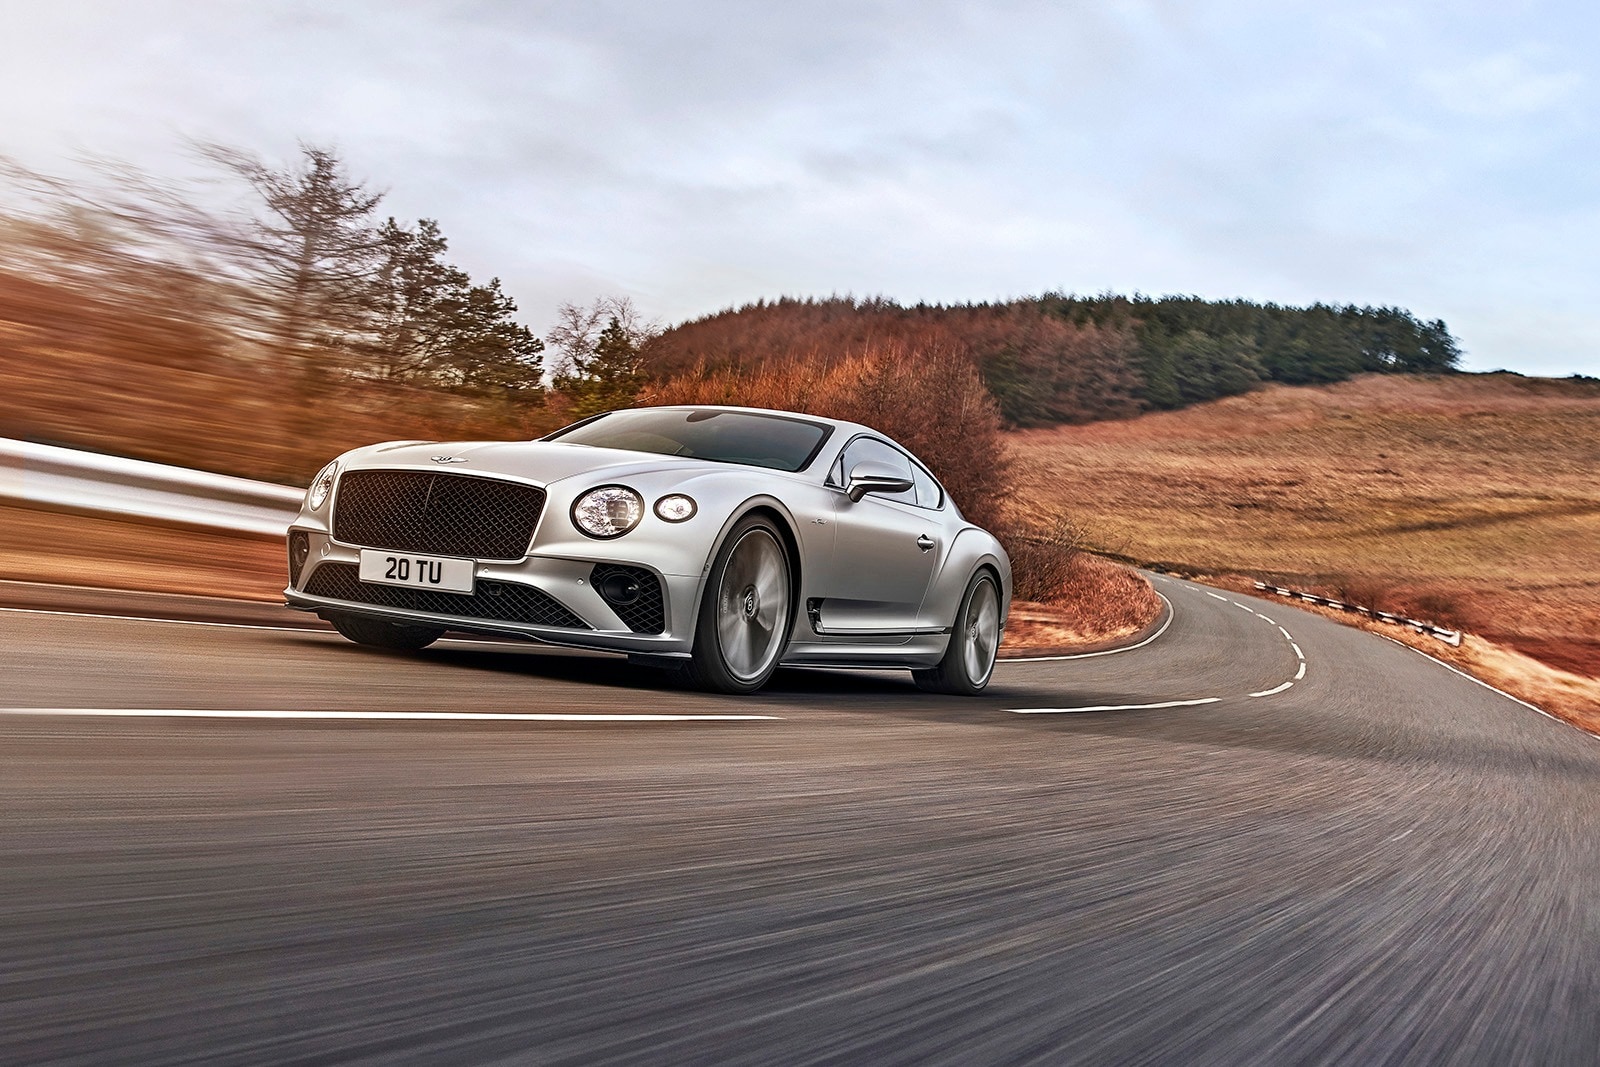 2022 Bentley Continental GT Speed Offers Mega Performance, but Benefits Over Standard Conti GT Are Marginal